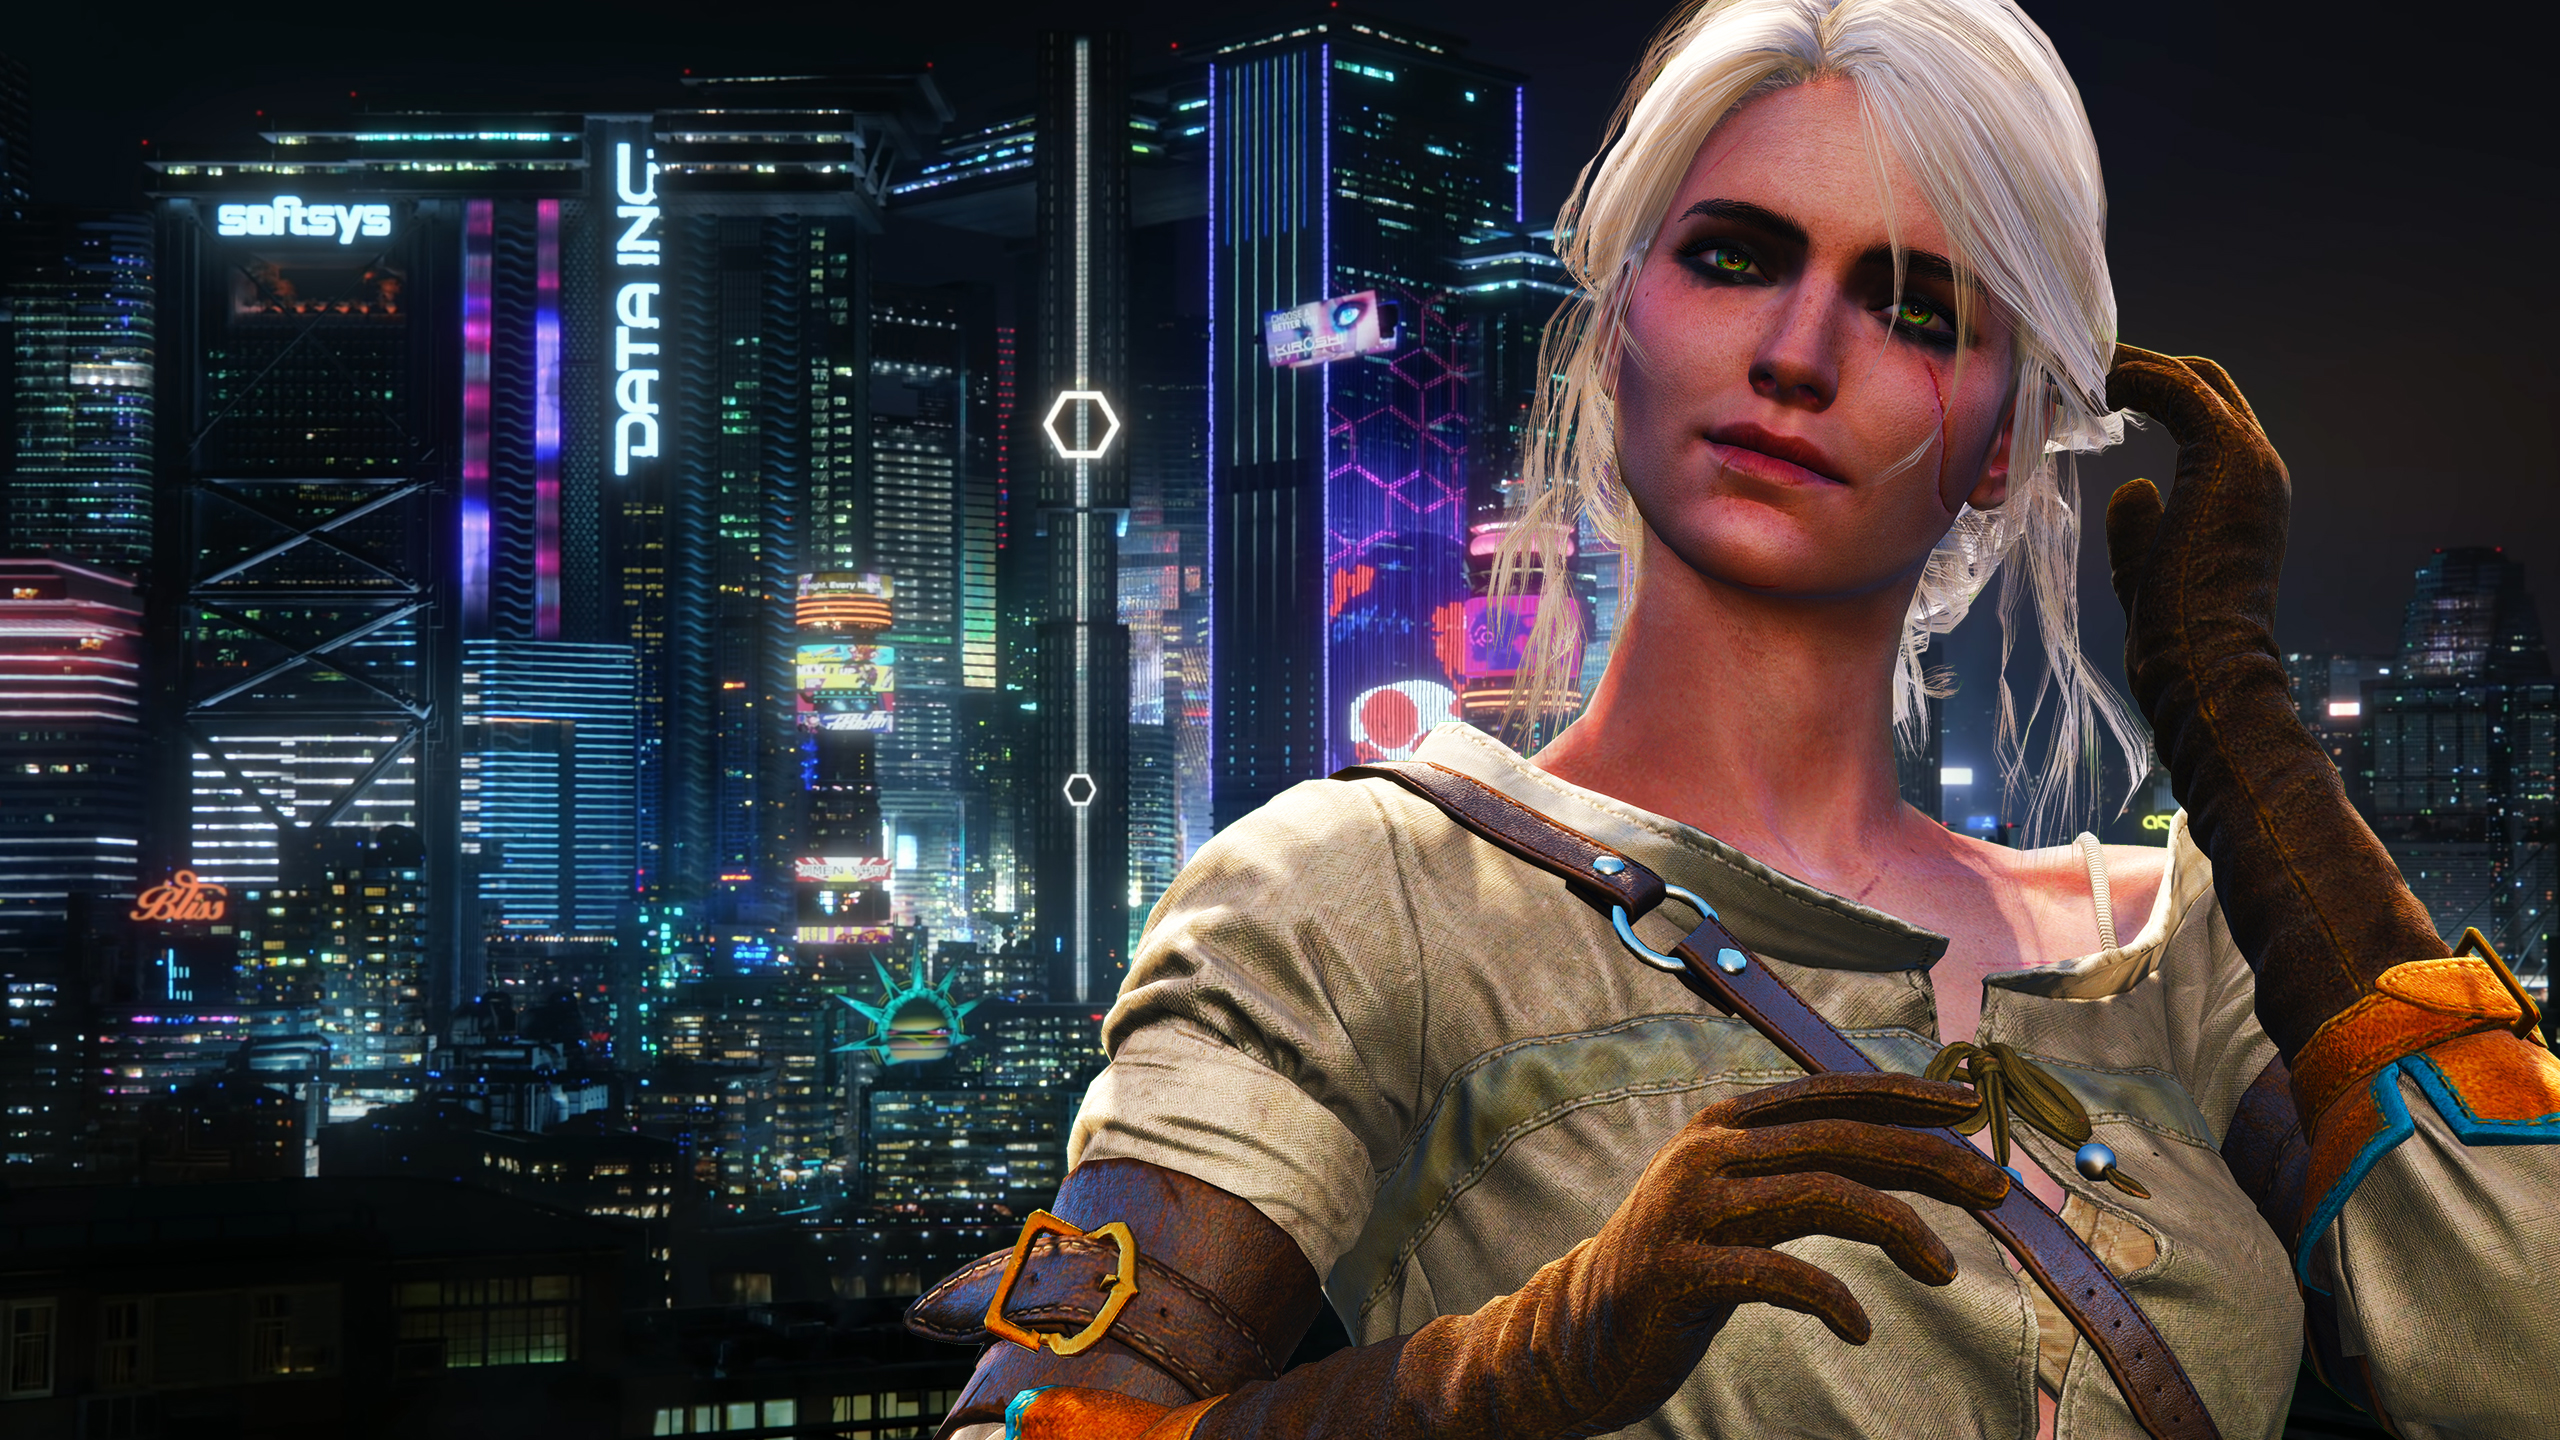  Will Ciri from The Witcher be in Cyberpunk 2077? 